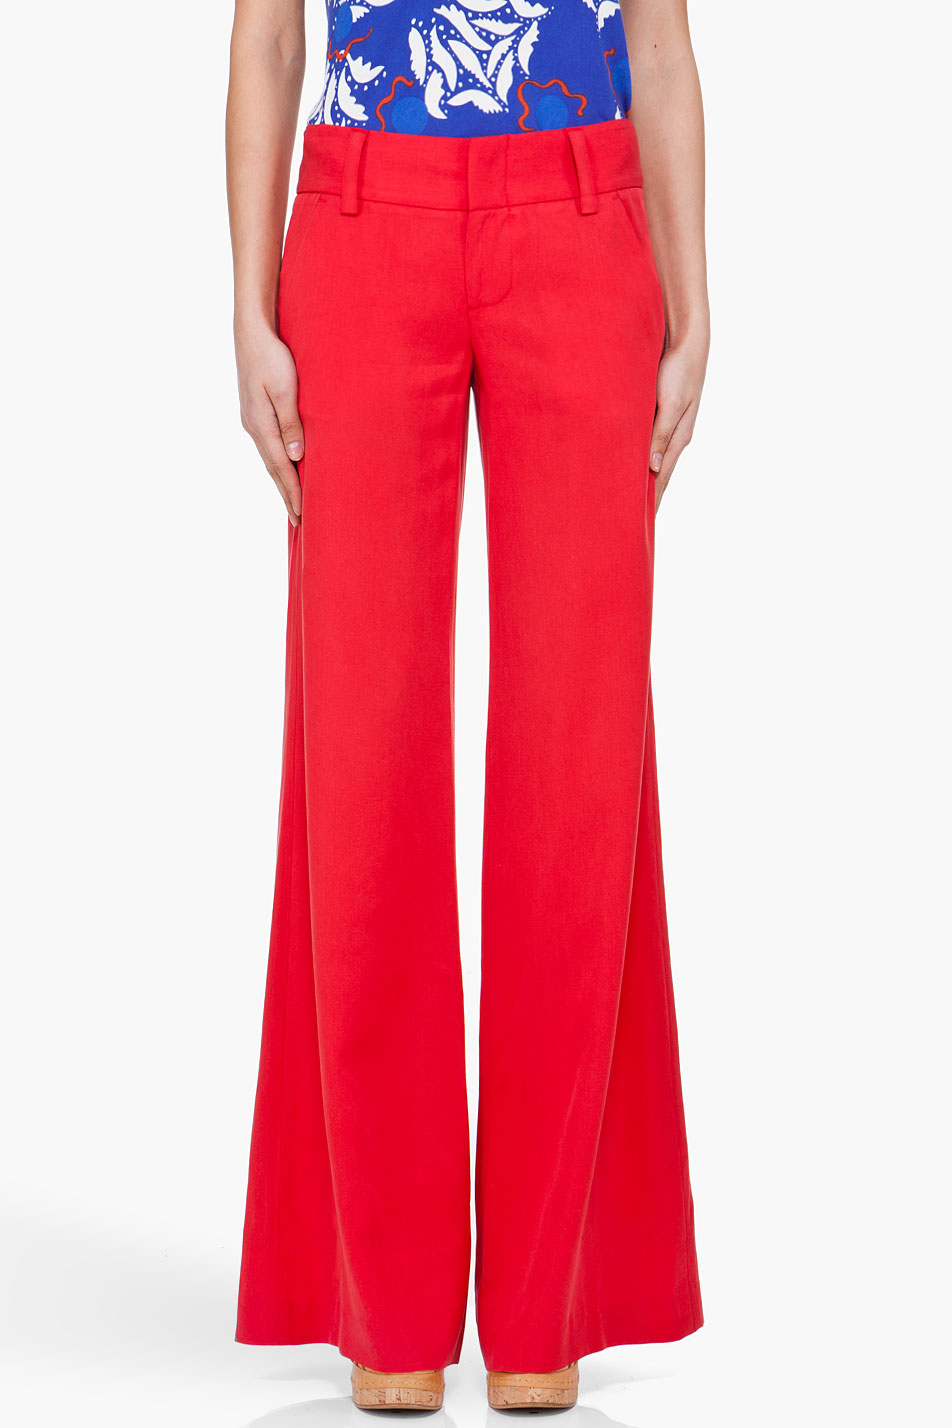 Alice + Olivia Extra Wide Leg Pants in Red (poppy) | Lyst